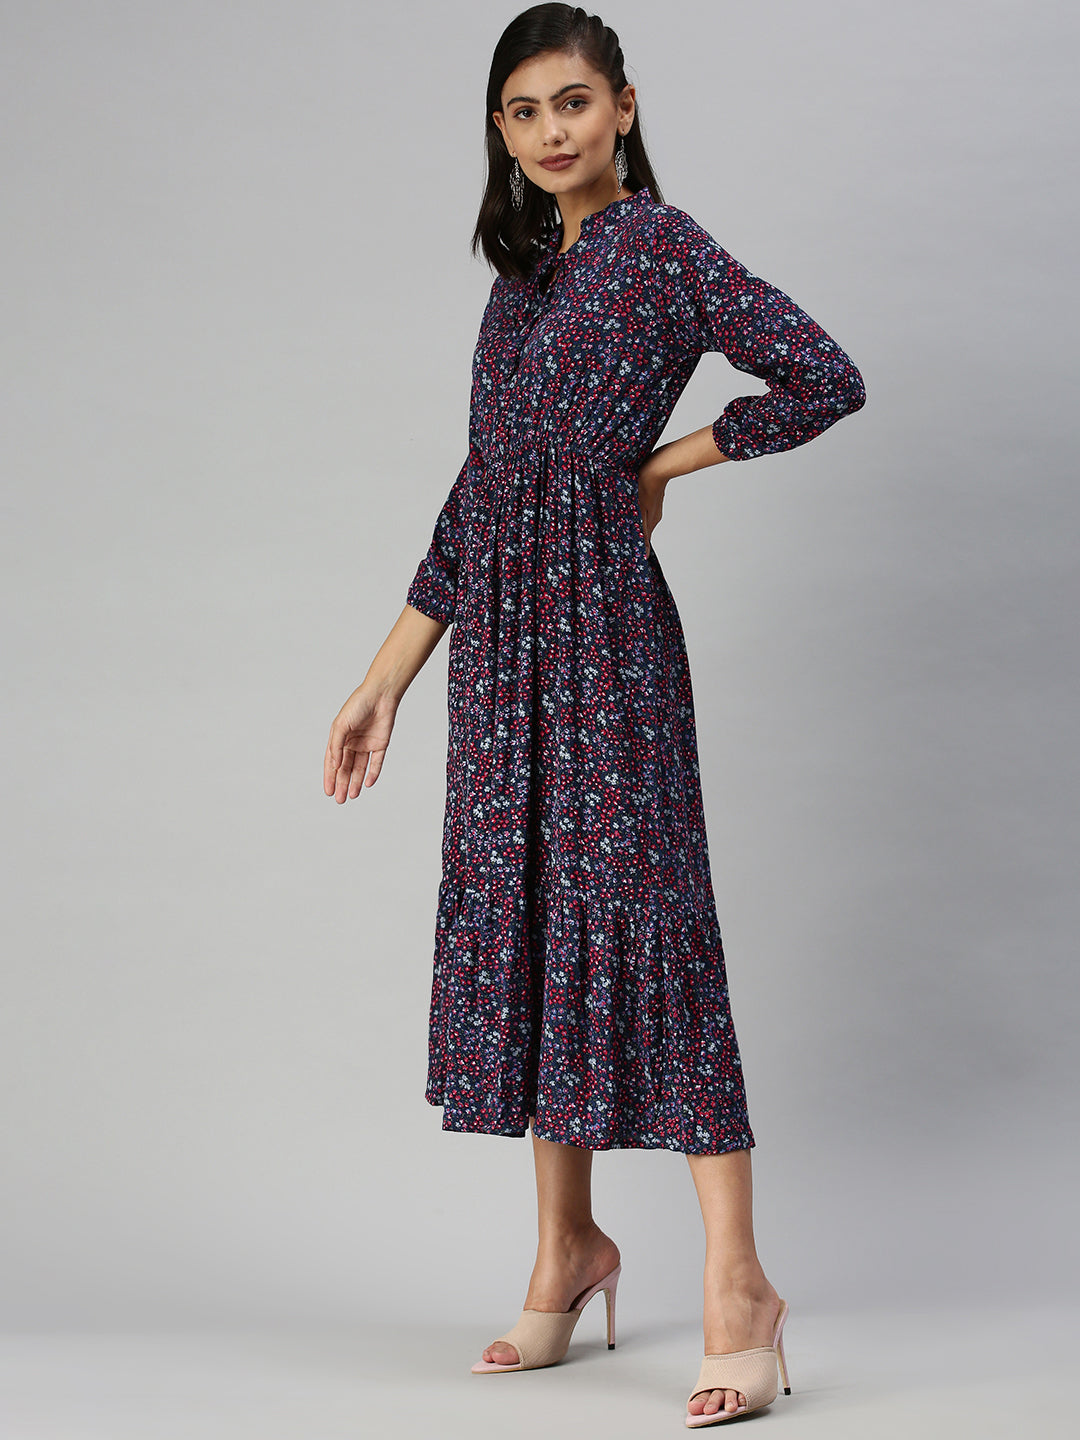 Women's Blue Printed Fit and Flare Dress